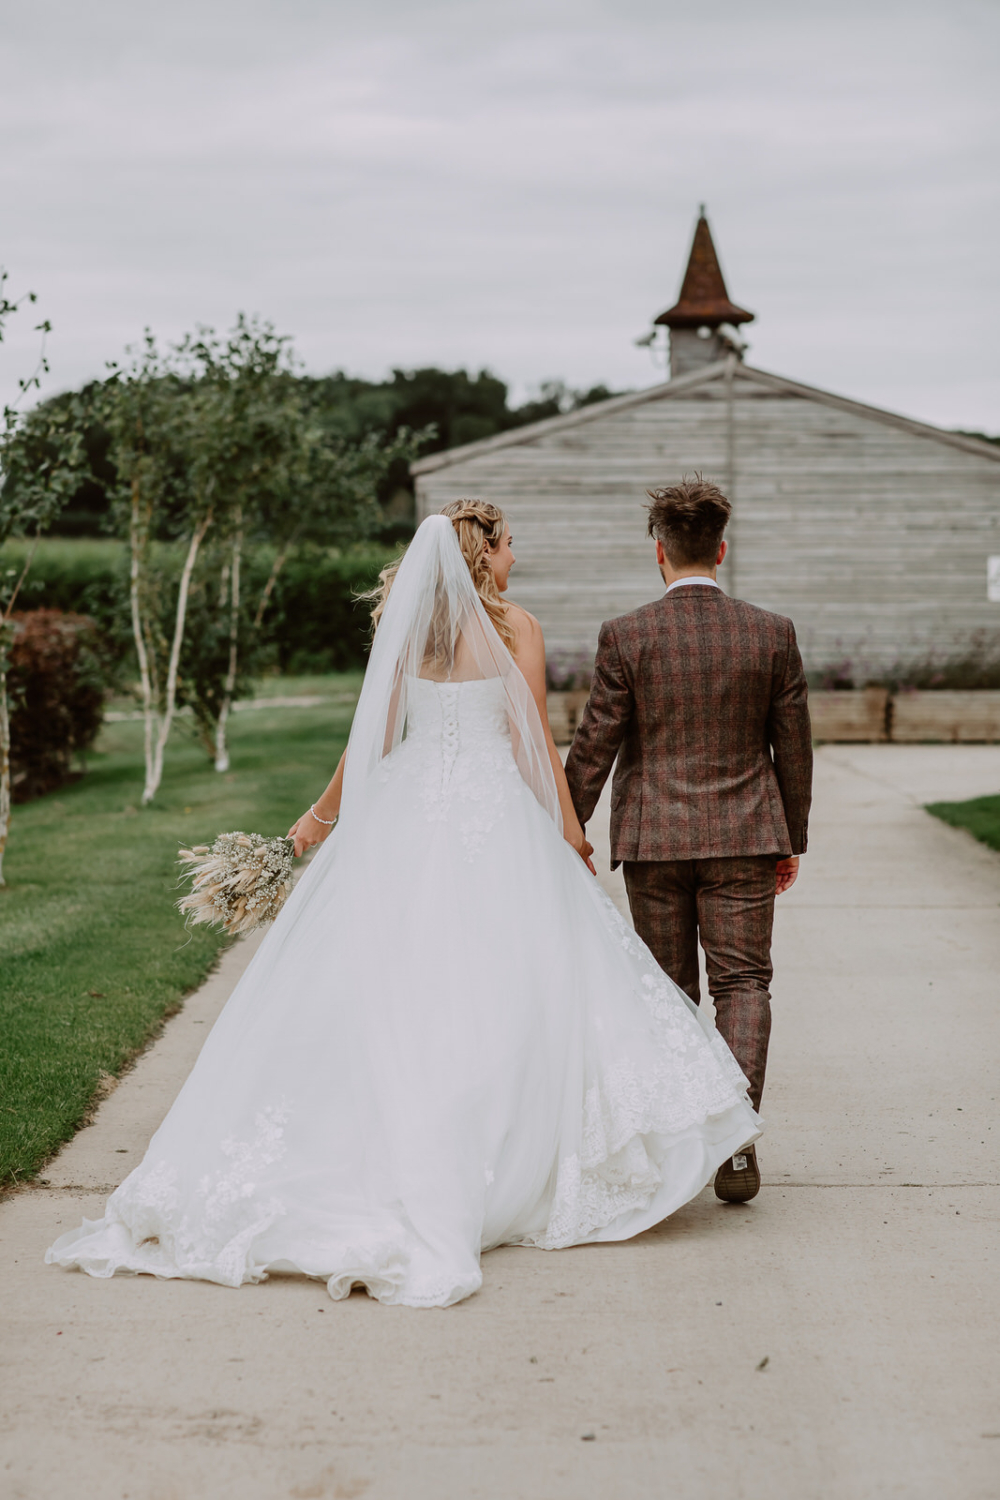 Couple walks away with the wind catching brides dress.